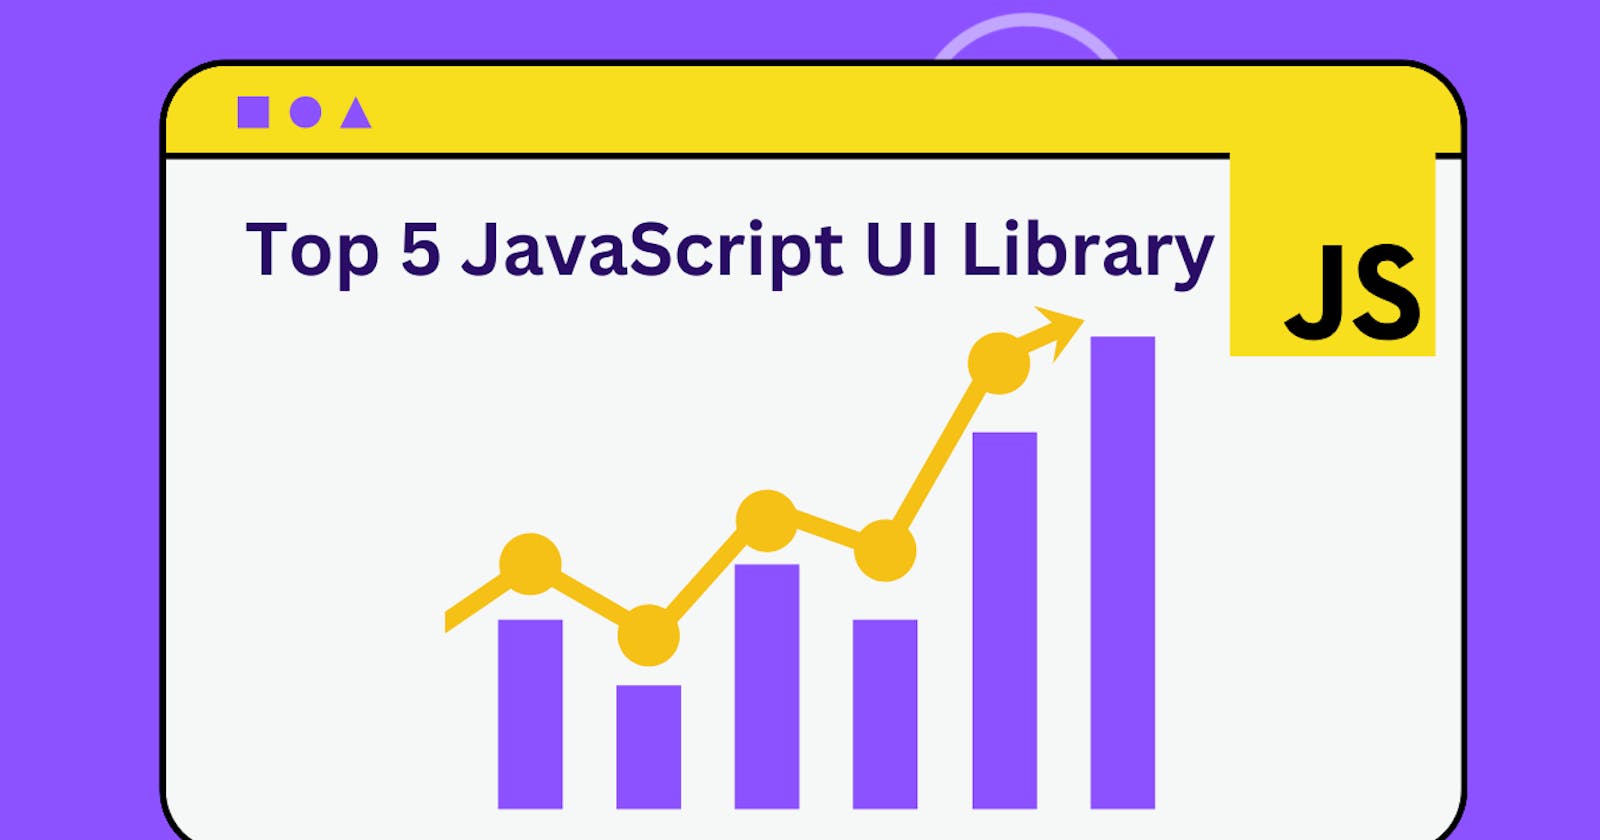 Top 5 JavaScript UI libraries for Web Developers in 2023